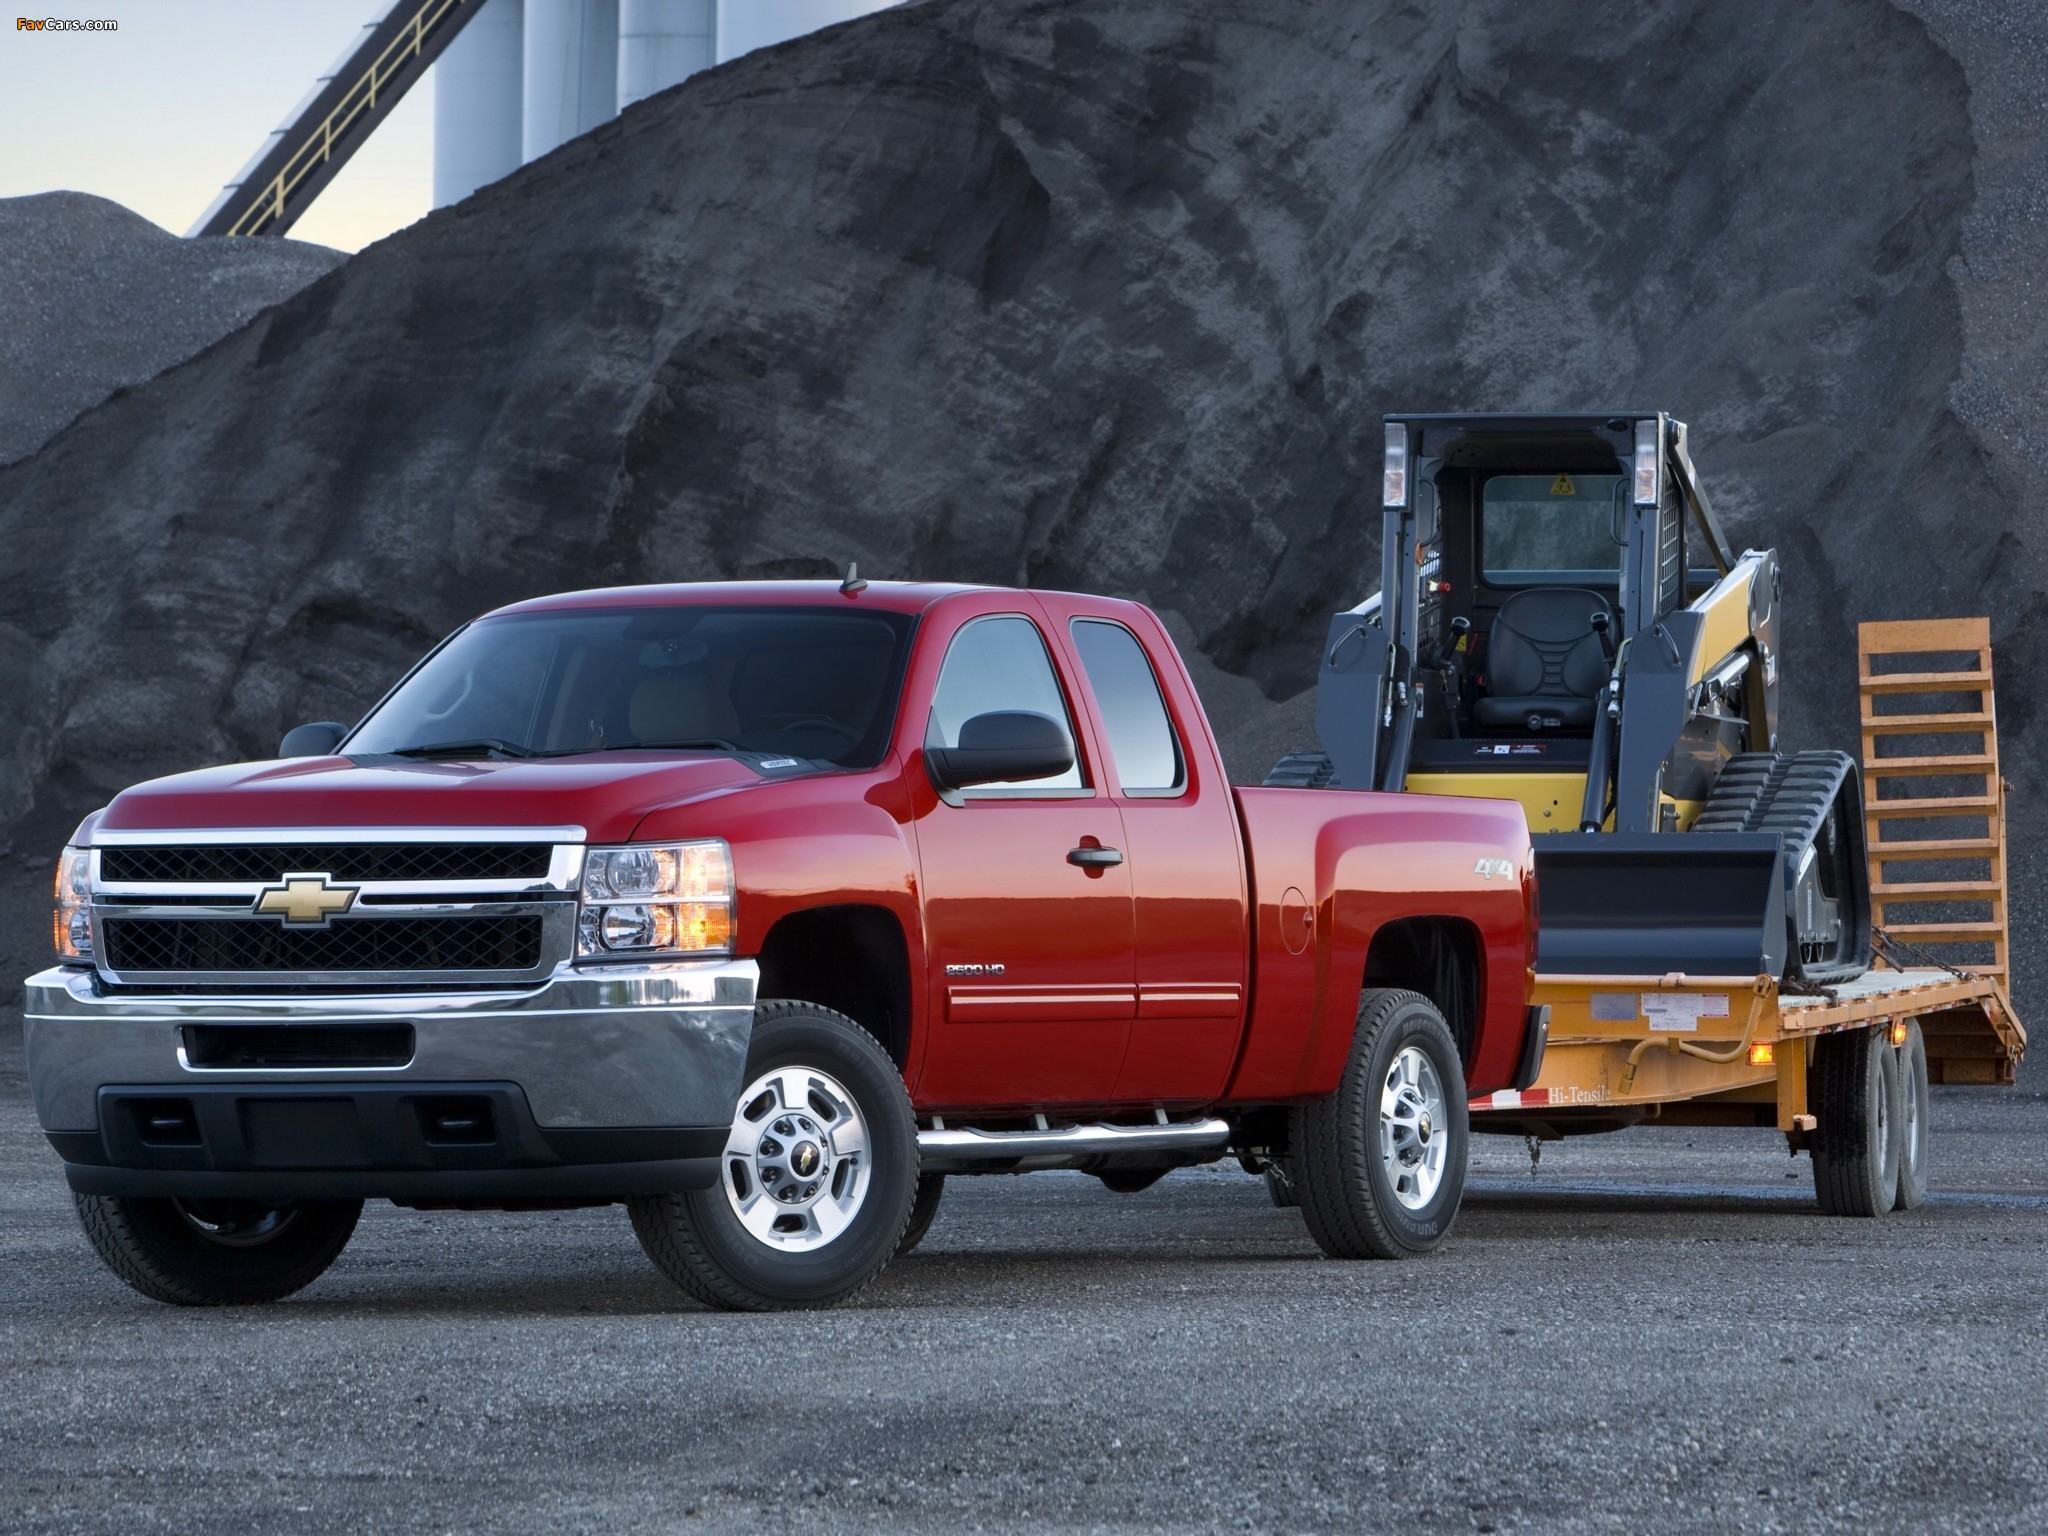 Chevrolet Silverado 2500 HD Extended Cab 2010 pictures (2048 x 1536)